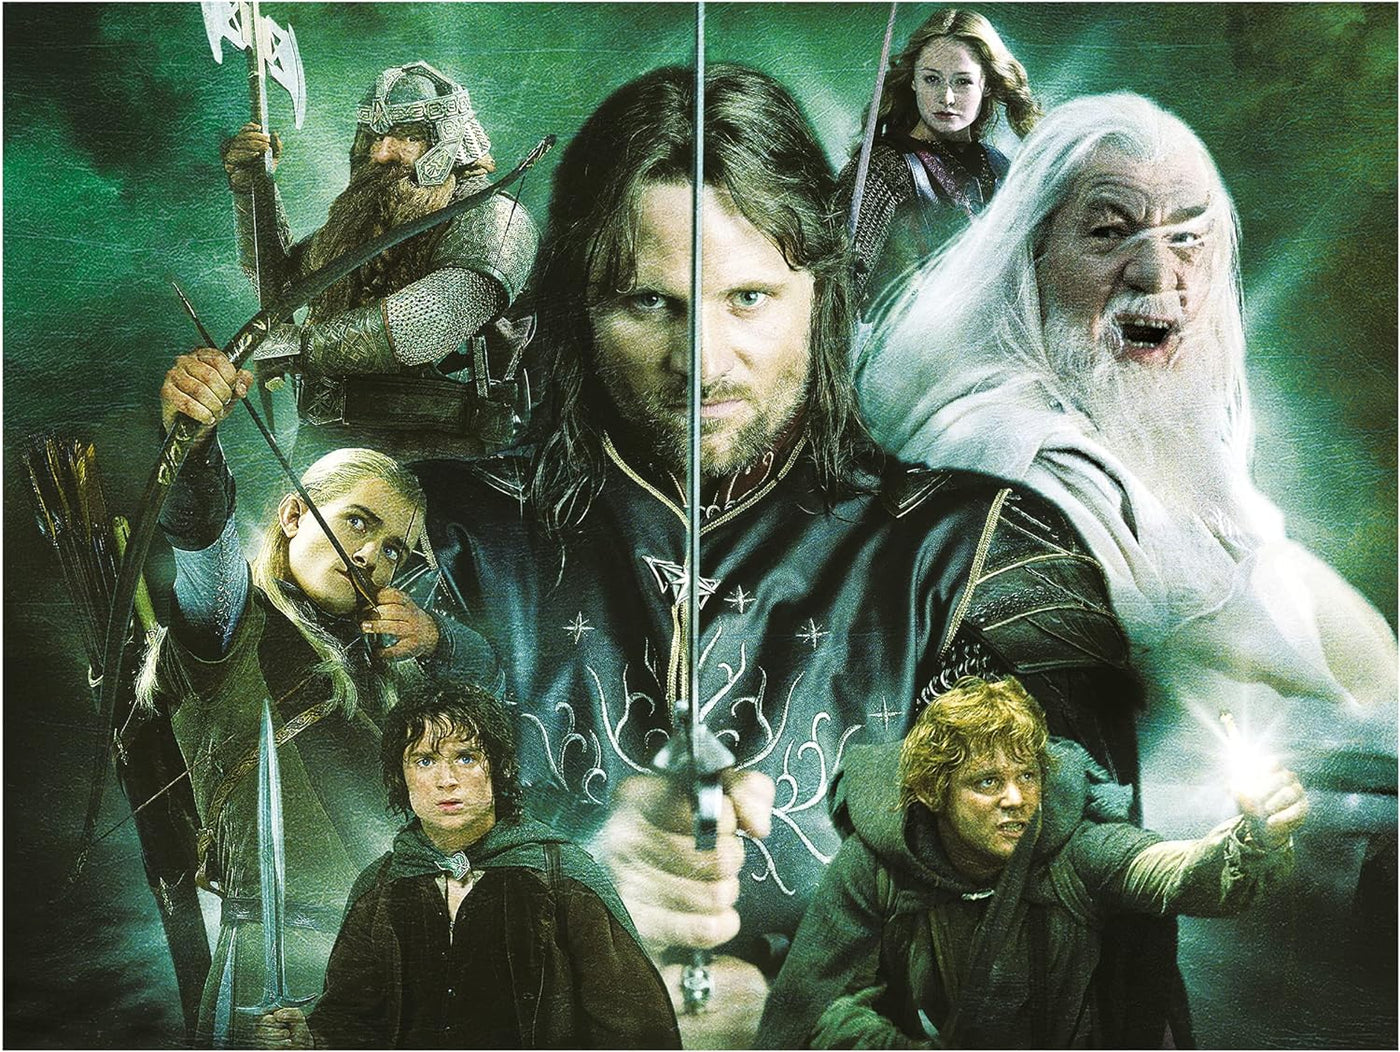 Lord of The Rings Heroes of Middle Earth 1000 Piece Puzzle